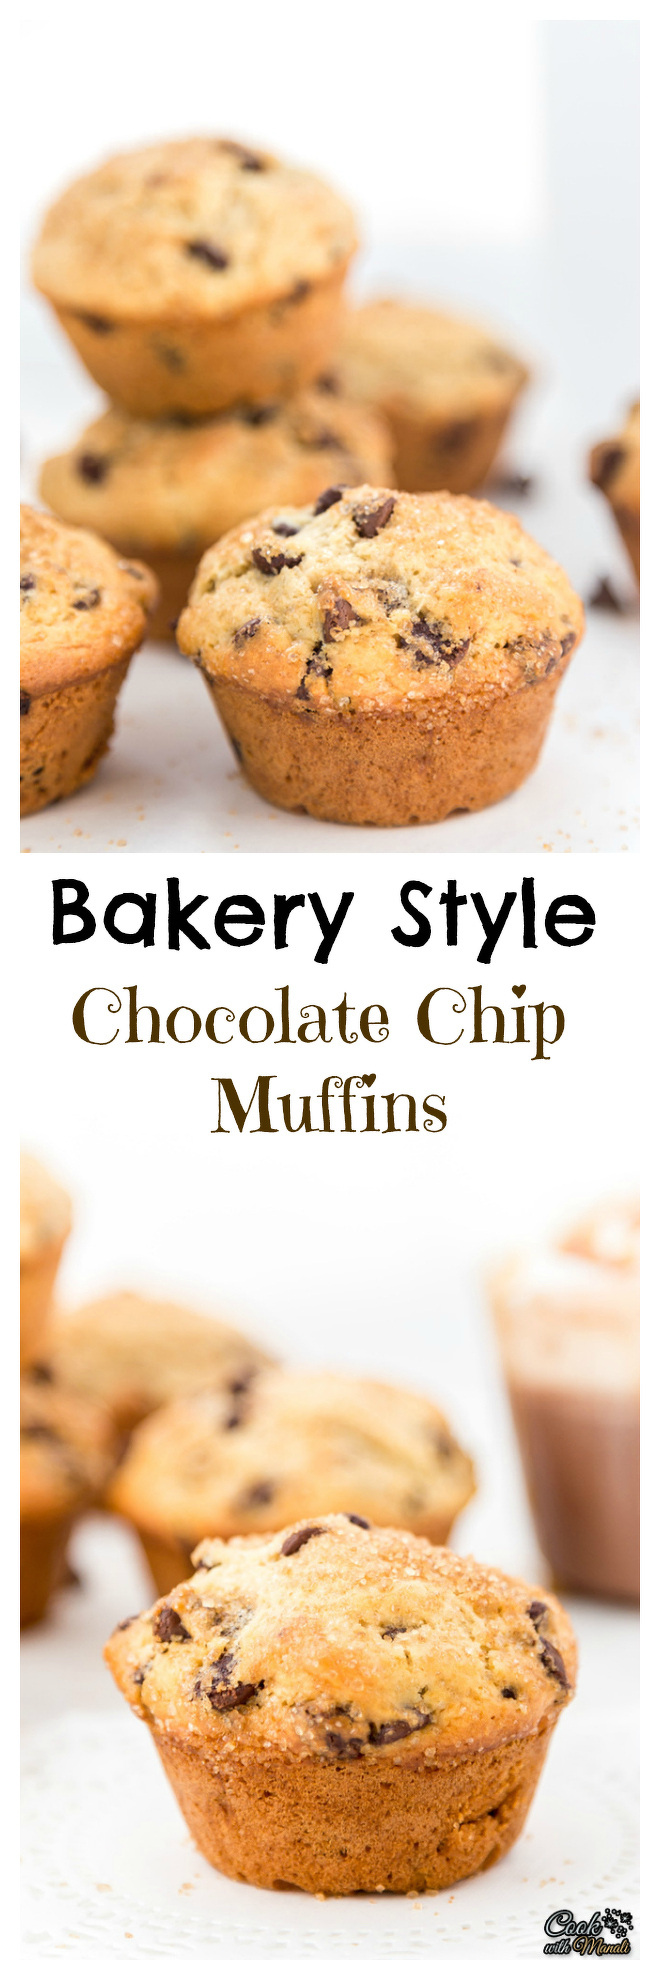 Bakery Style Chocolate Chip Muffins - Cook With Manali